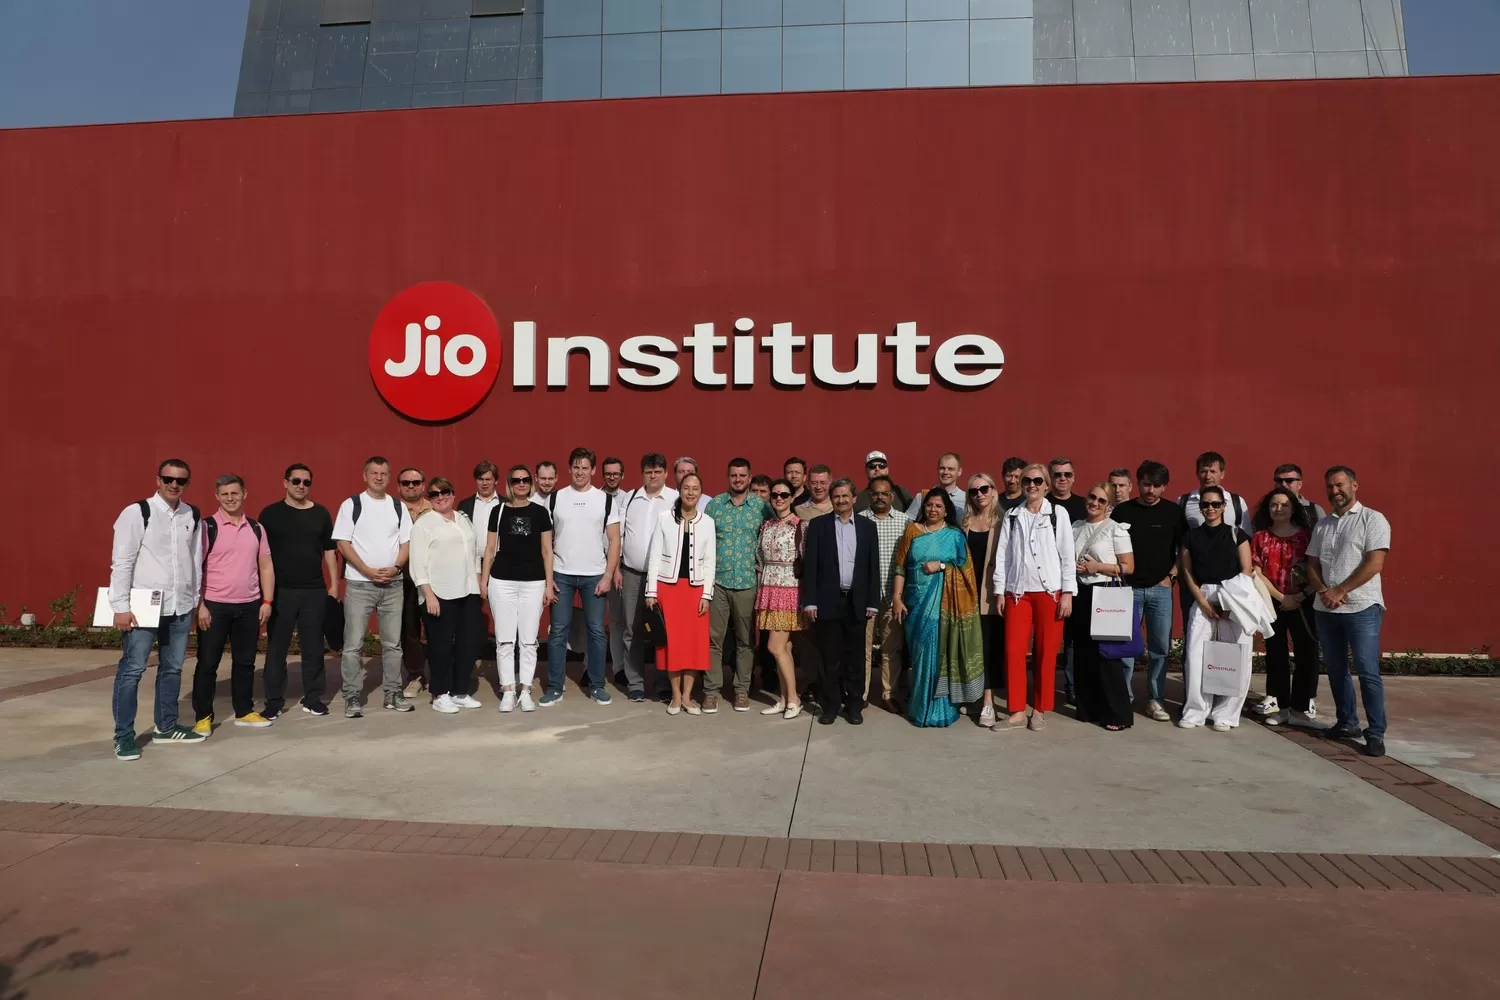 Group Picture before Jio Institute